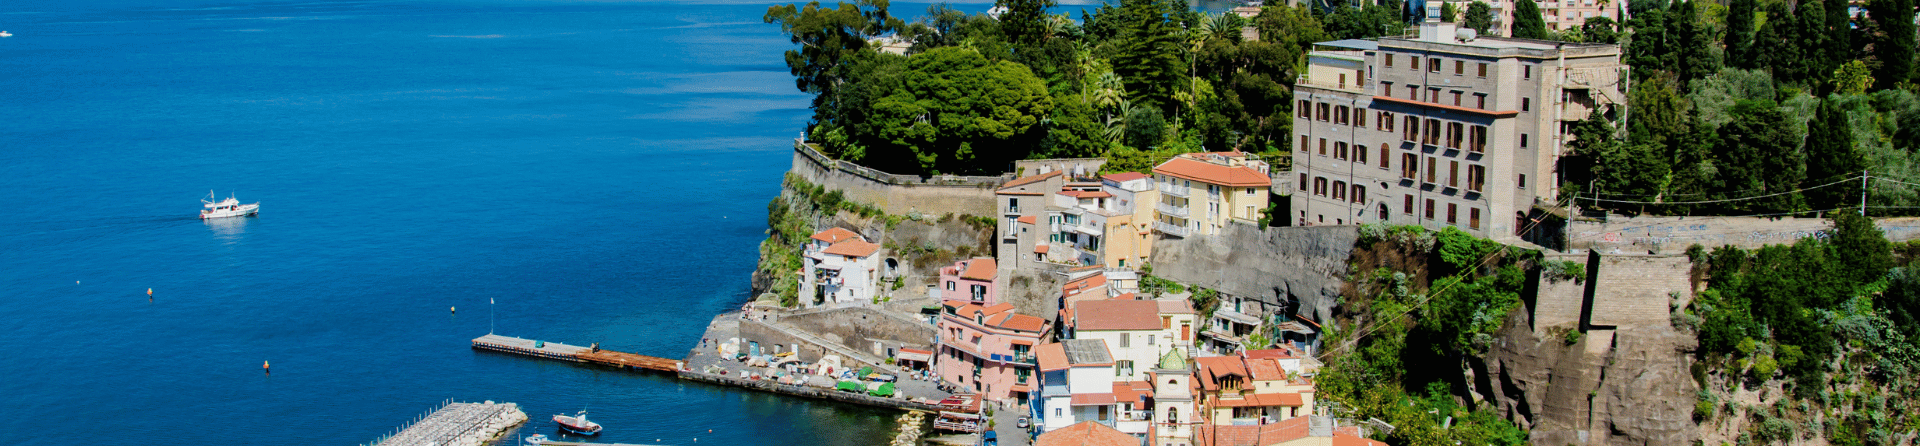 Top things to do in Sorrento